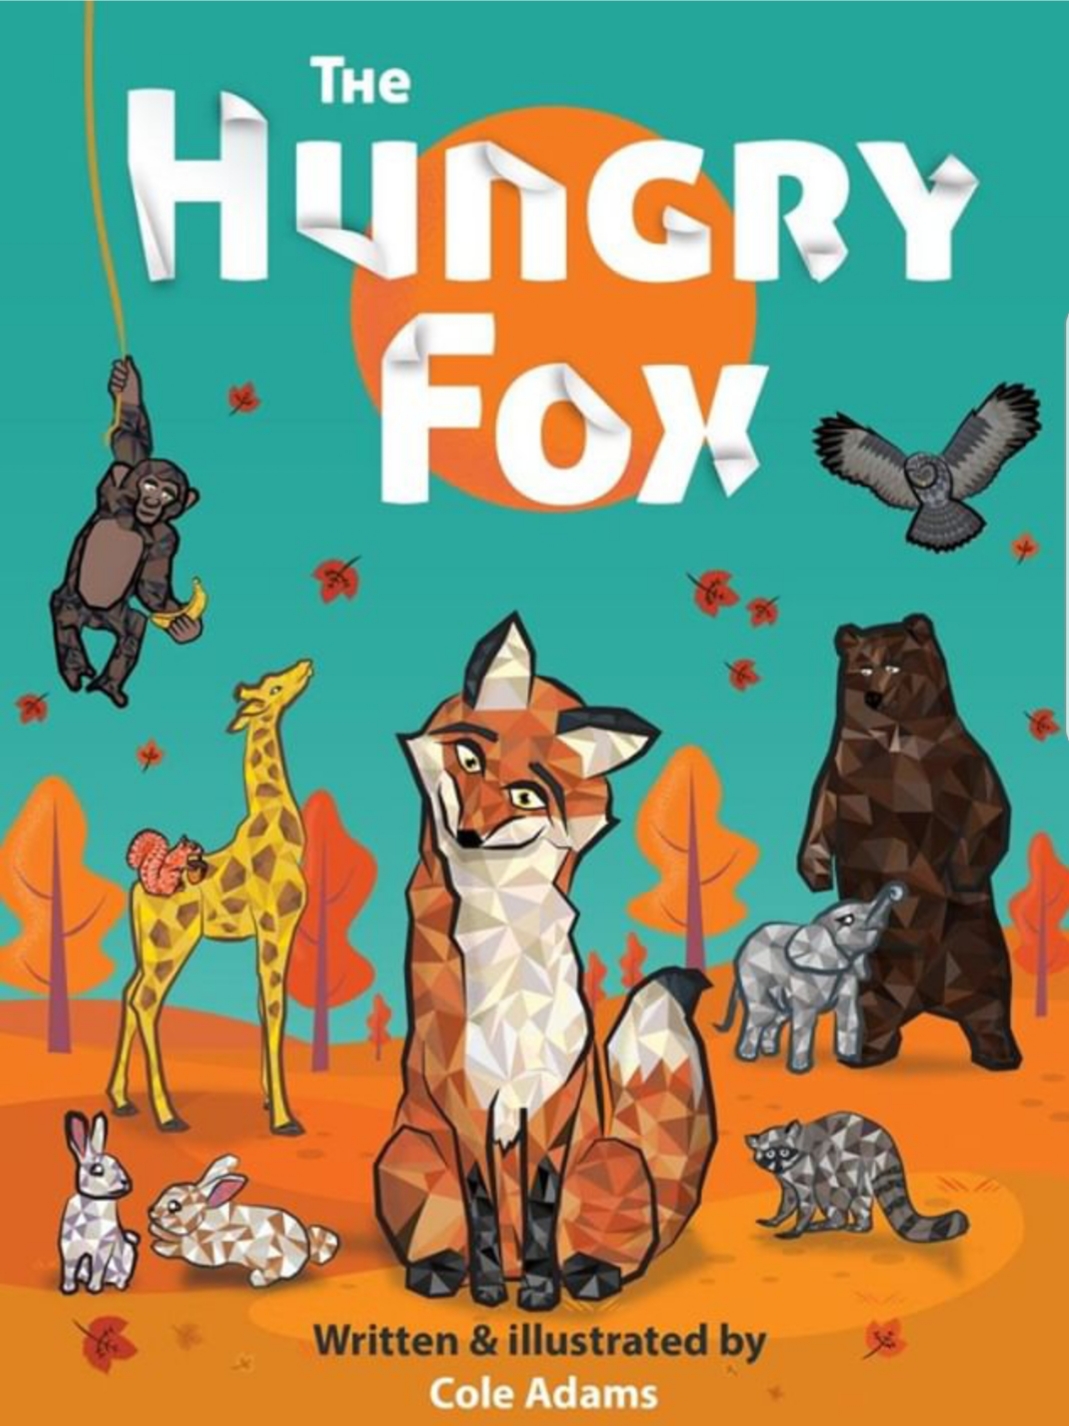 Kid Lit Book Review – The Hungry Fox